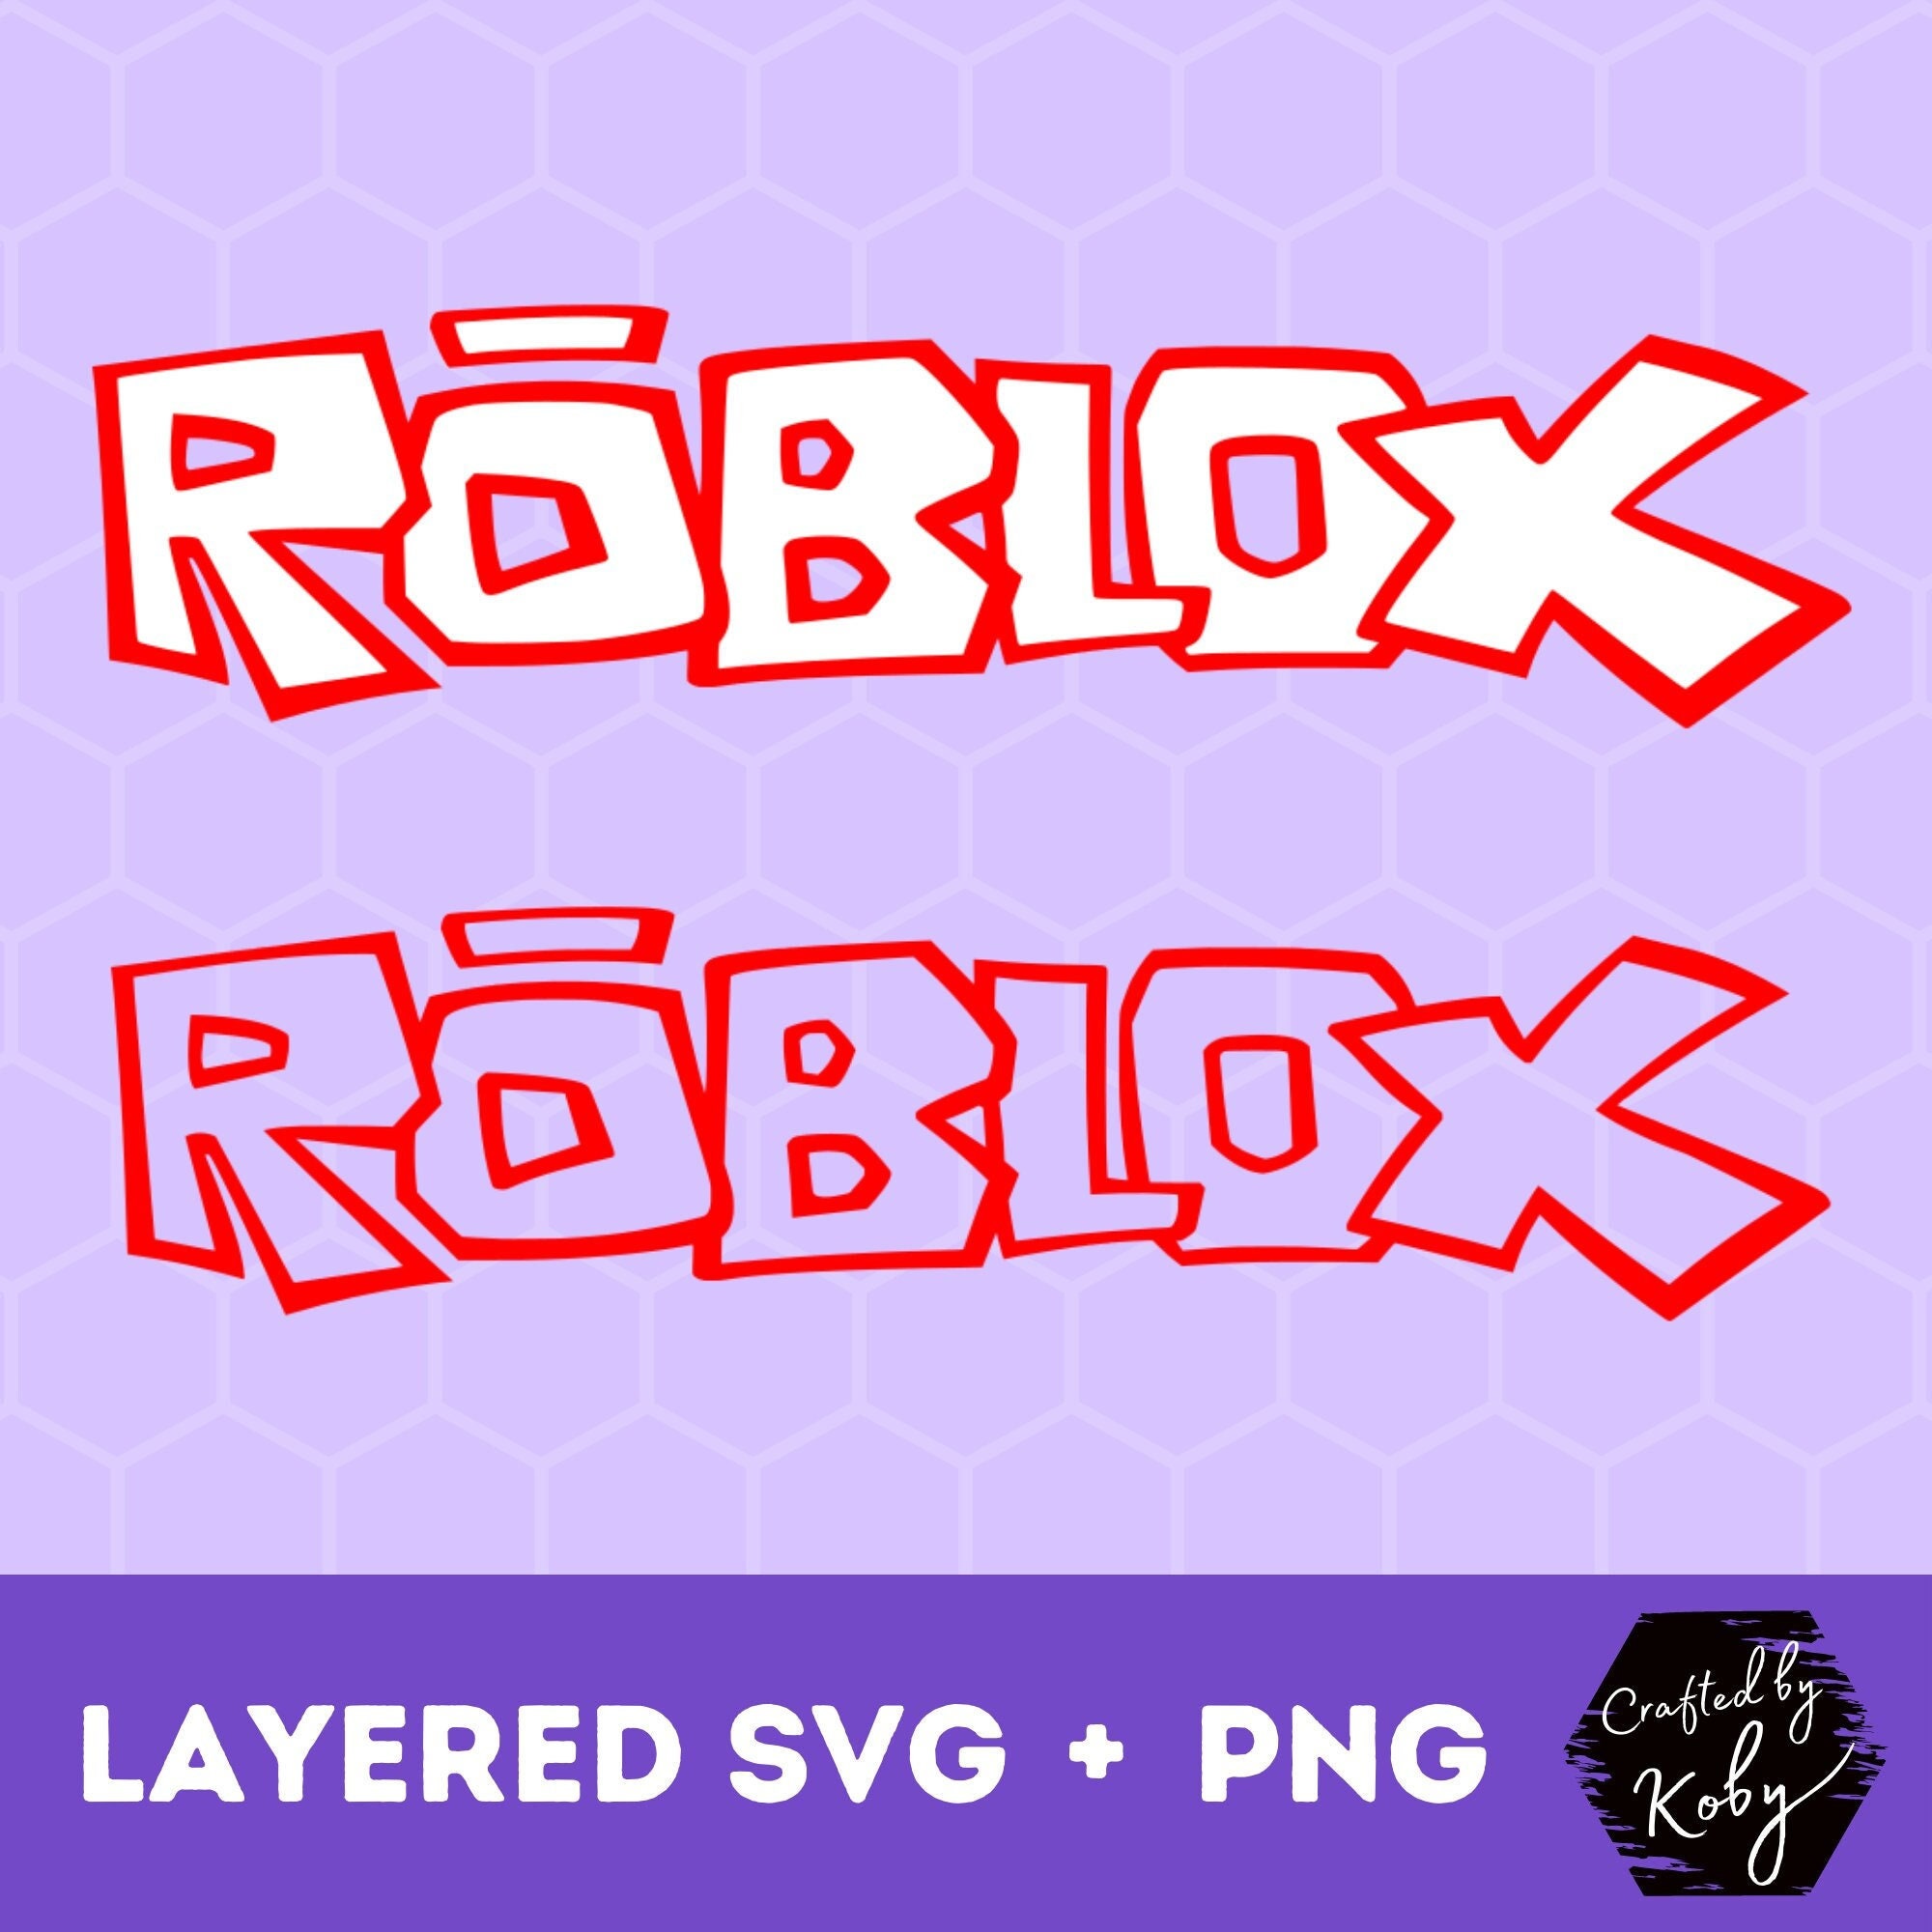 Roblox Connect 2023 Logo PNG vector in SVG, PDF, AI, CDR format